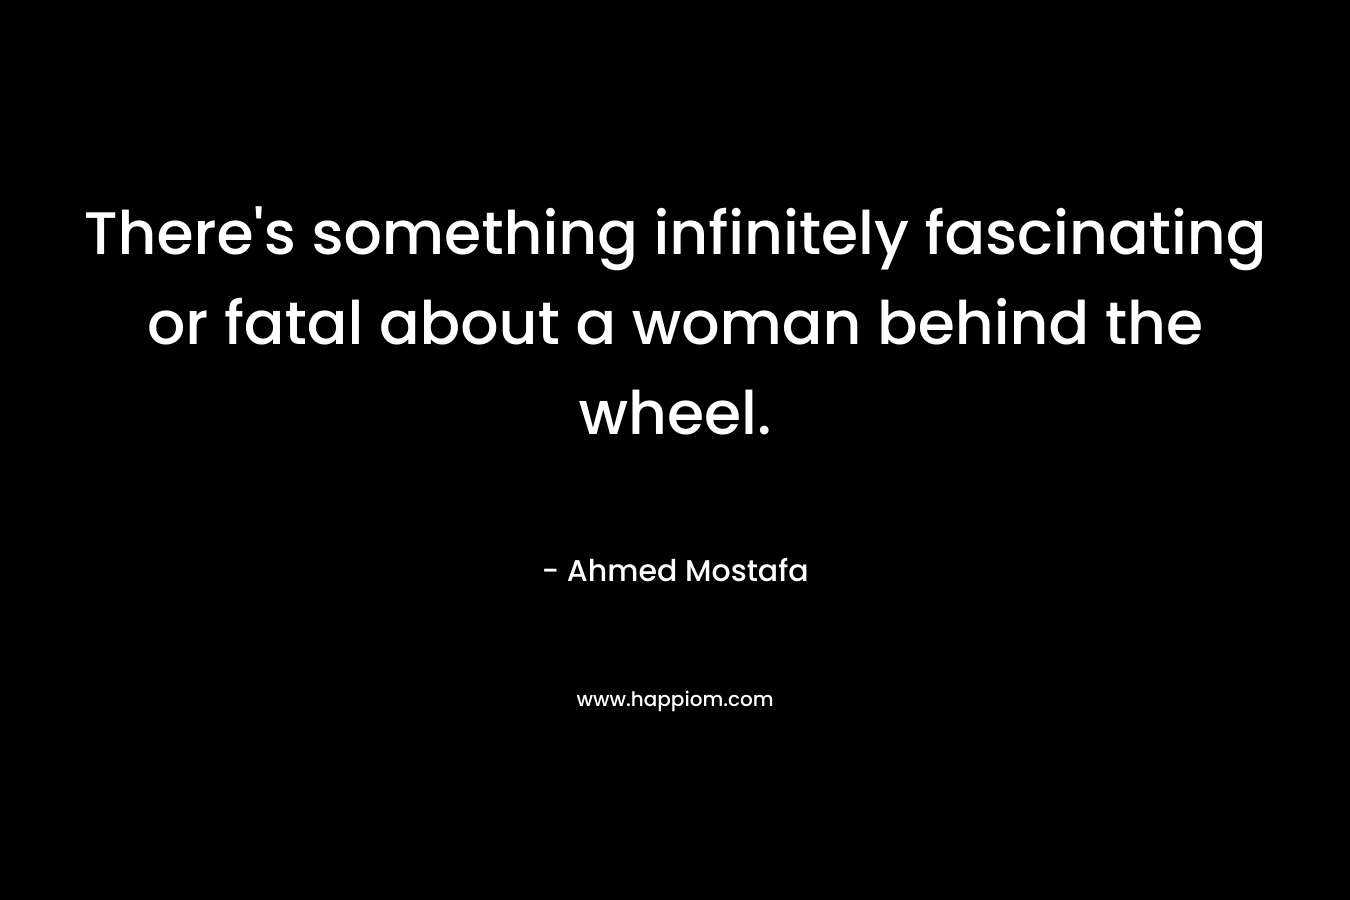 There's something infinitely fascinating or fatal about a woman behind the wheel.